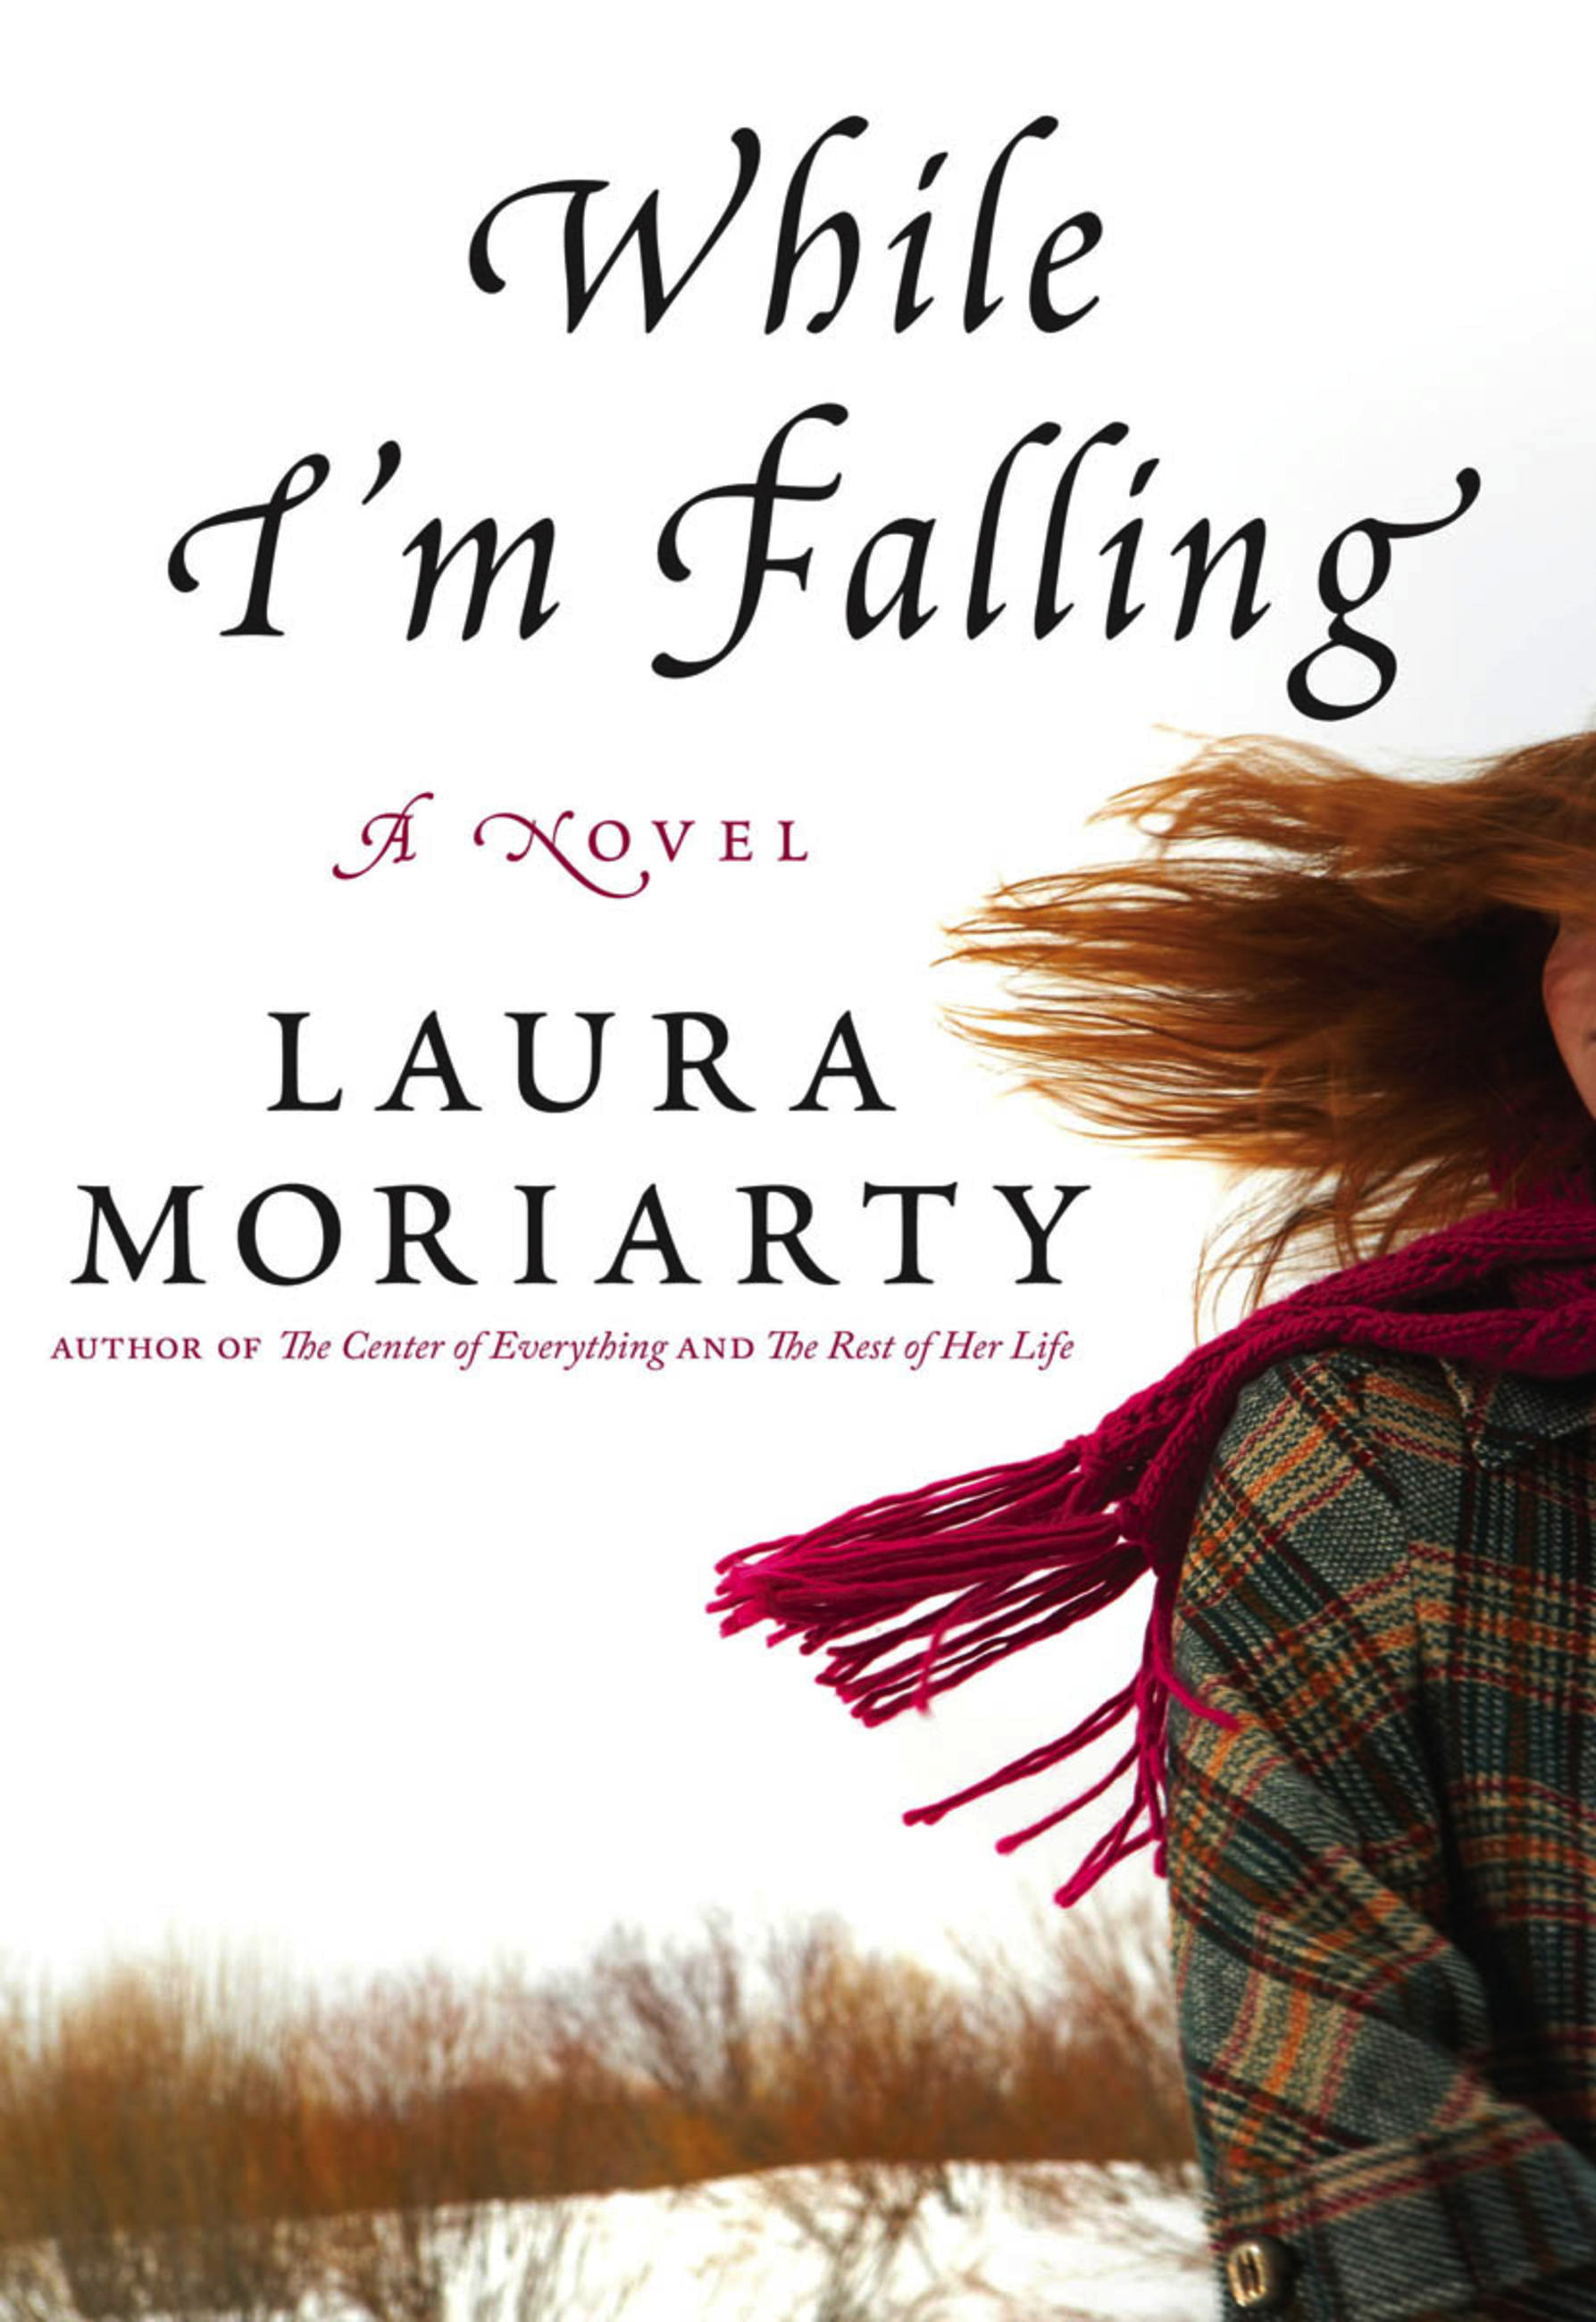 While　Book　Falling　I'm　Hachette　Moriarty　by　Laura　Group